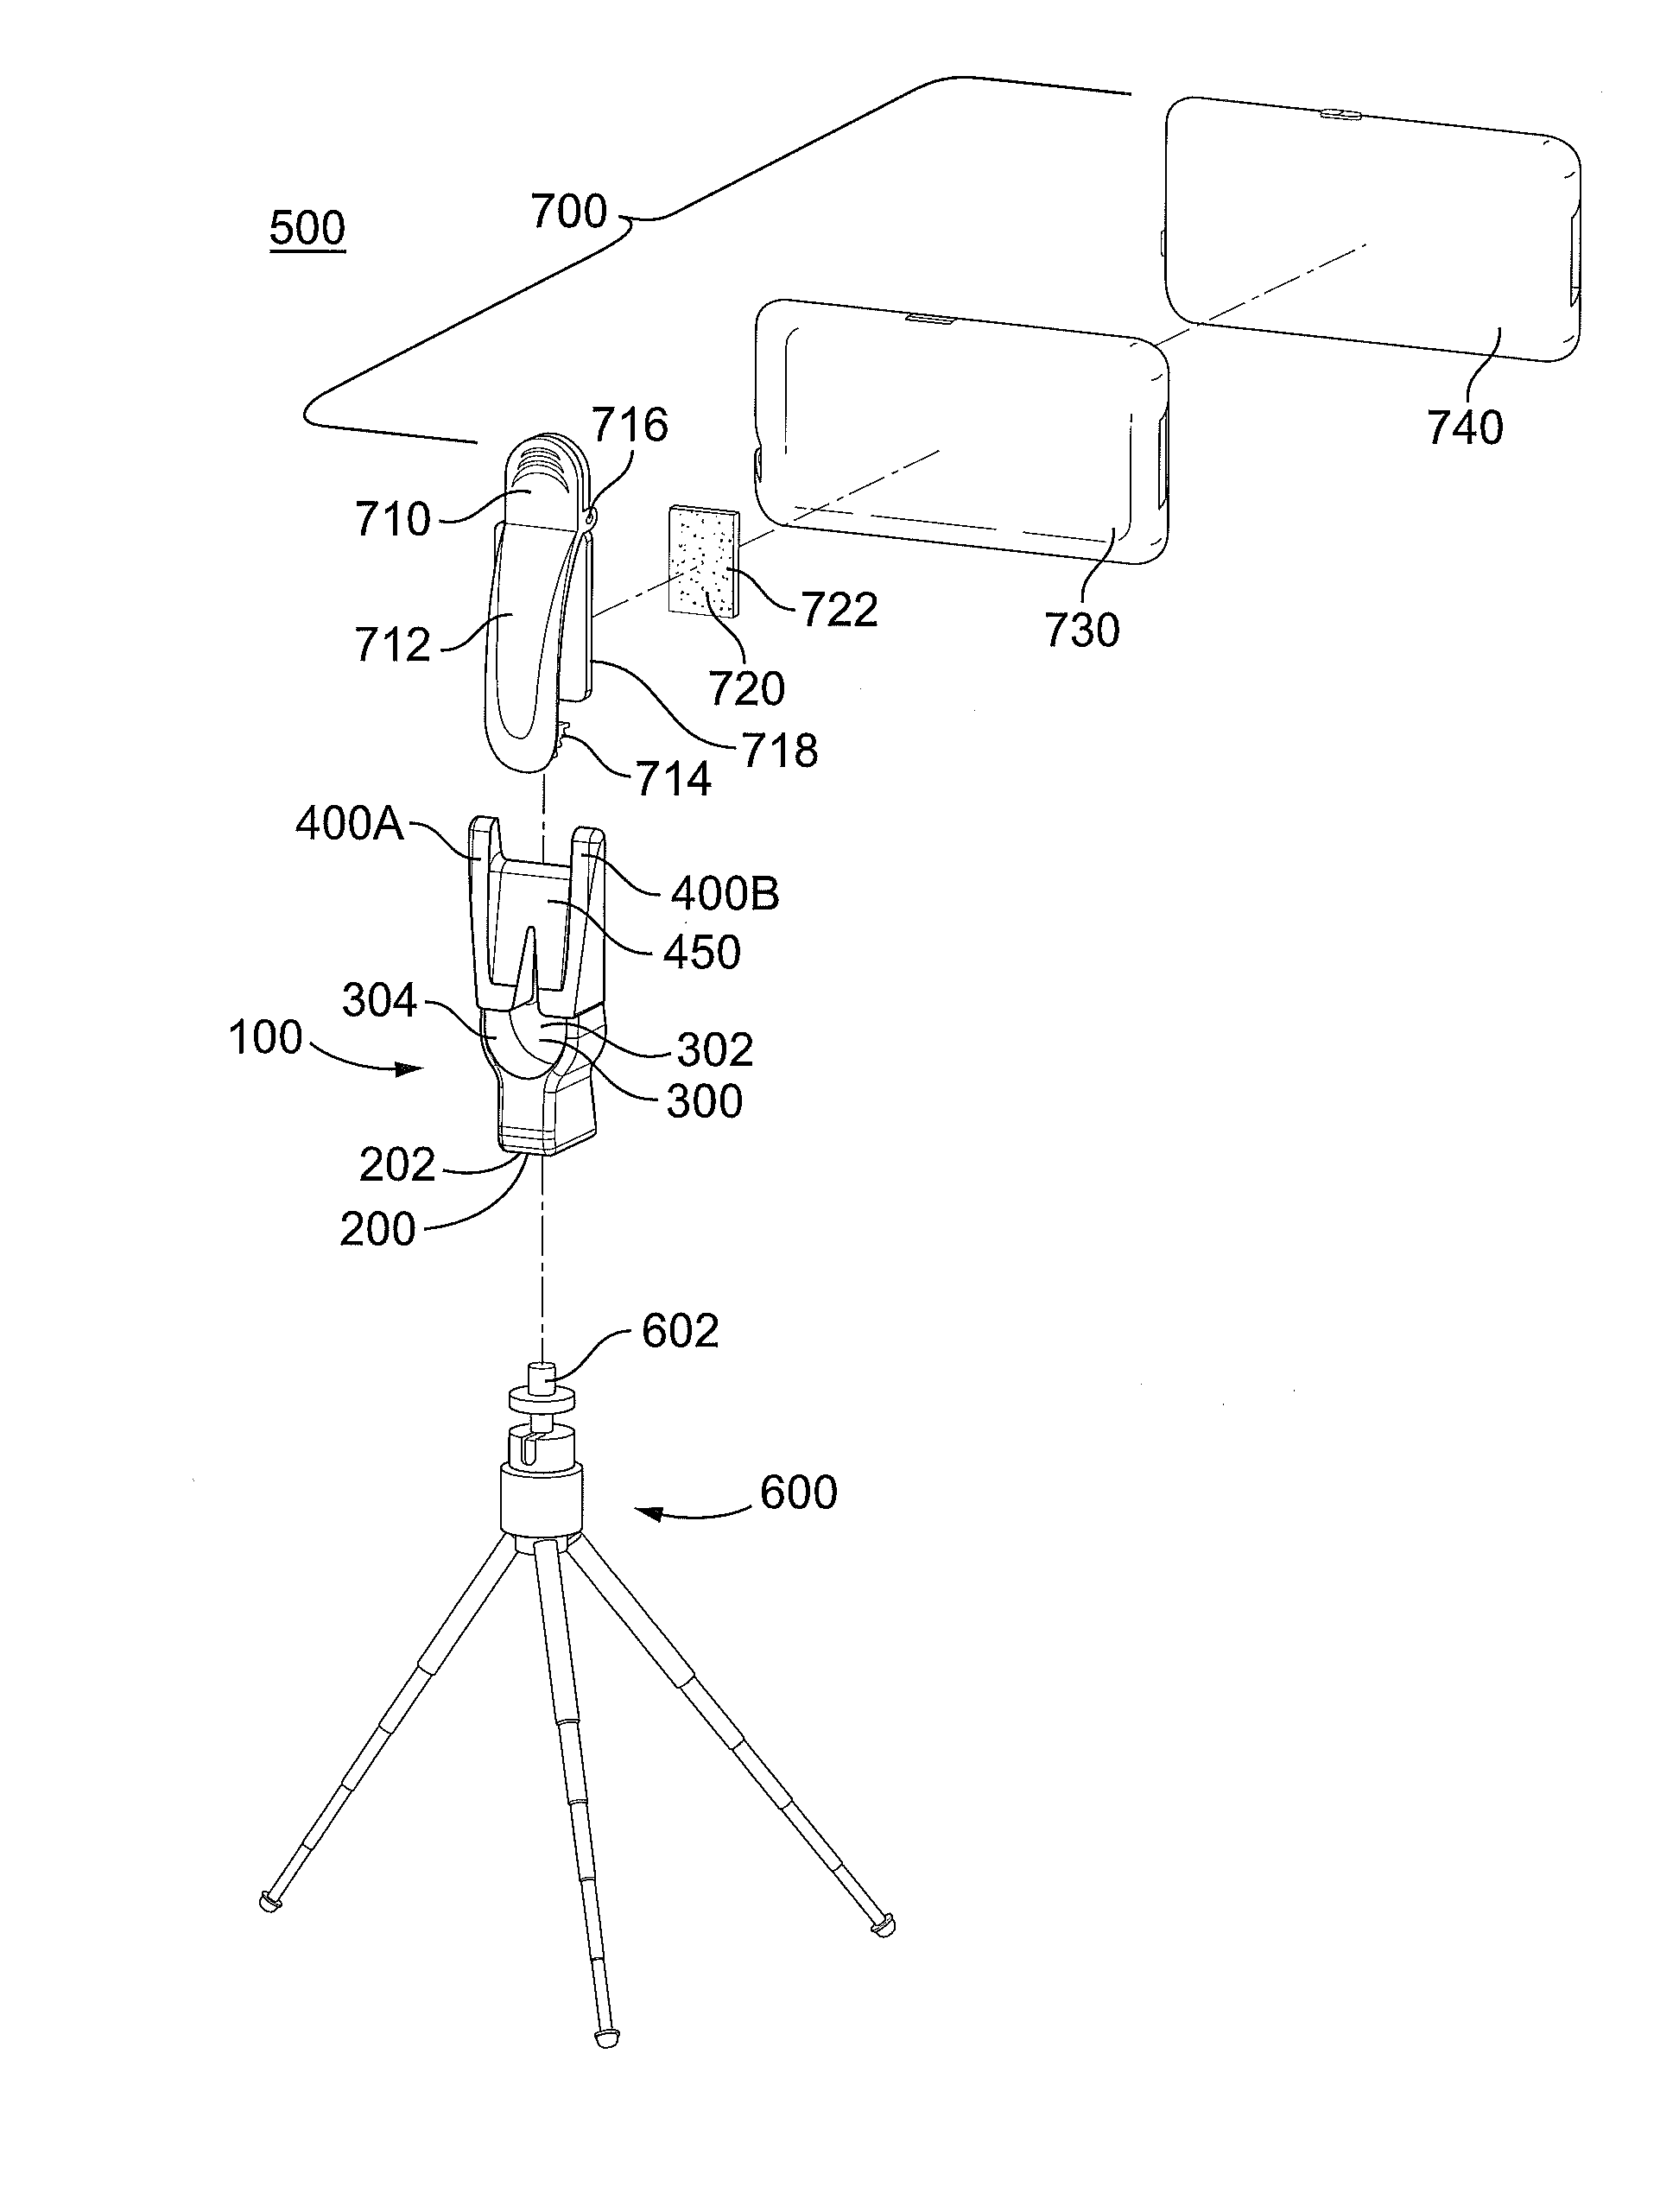 Adapter apparatus for portable handheld device